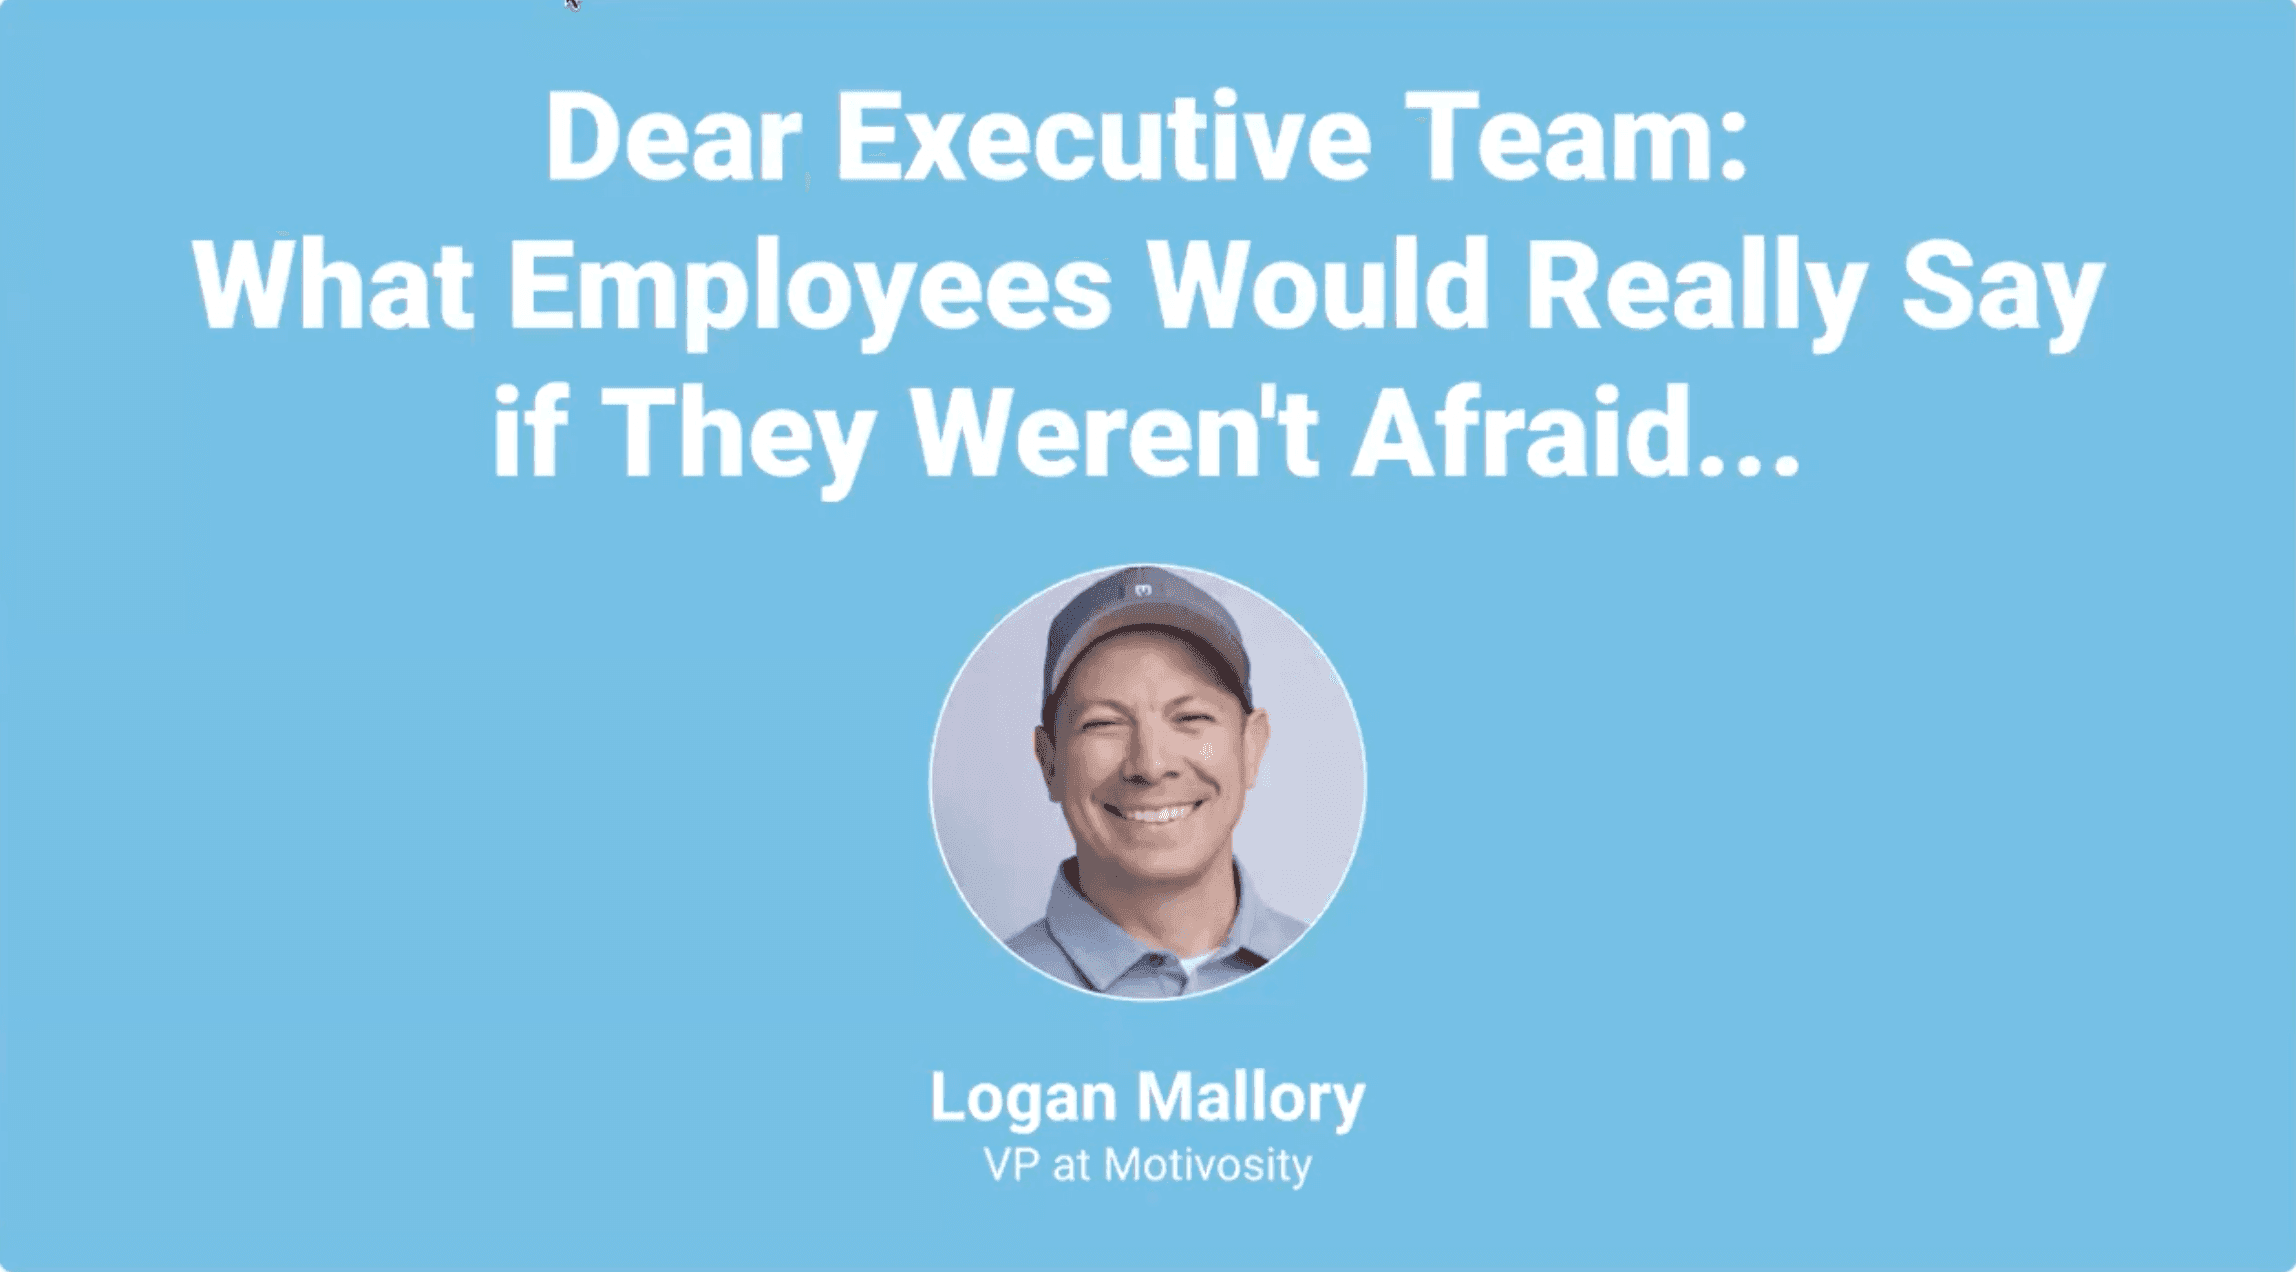 Webinar: DEAR EXECUTIVE TEAM: What Employees Would Really Say if They Weren't Afraid...